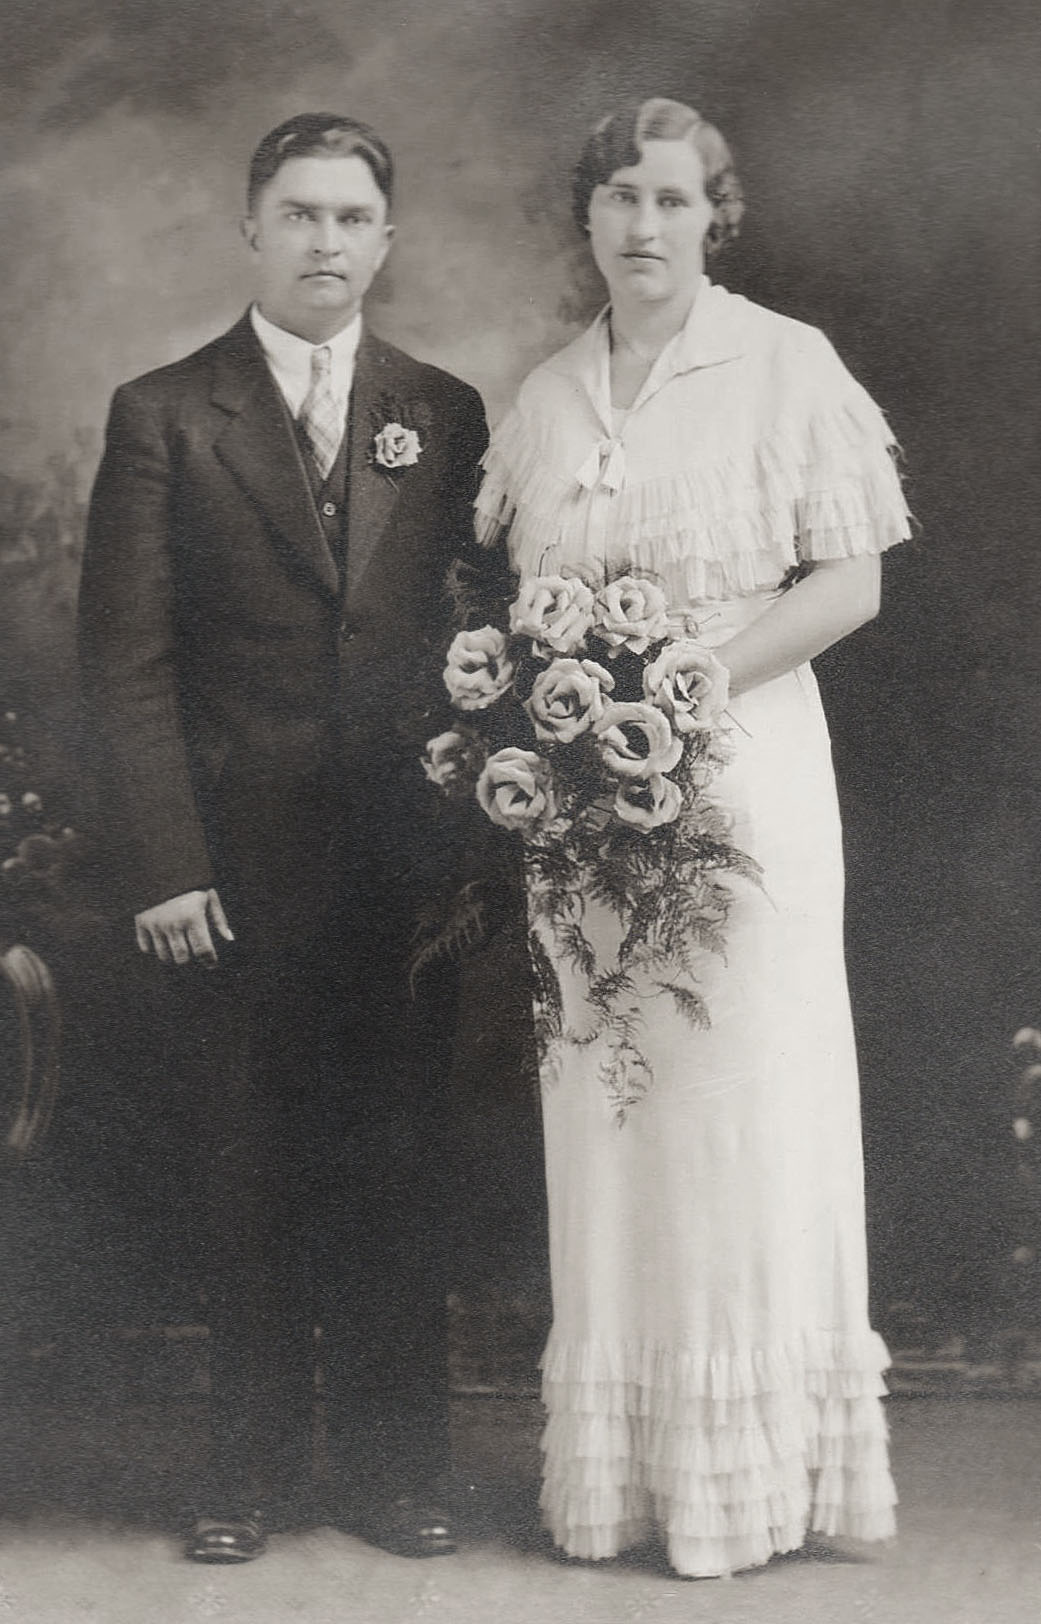 This is the wedding portrait of Otto and Ann Gegel (as written on the back of the photo). The photo is not dated, but it was taken by William Welge, a photographer in Chester, Illinois, who opened his studio around 1902.